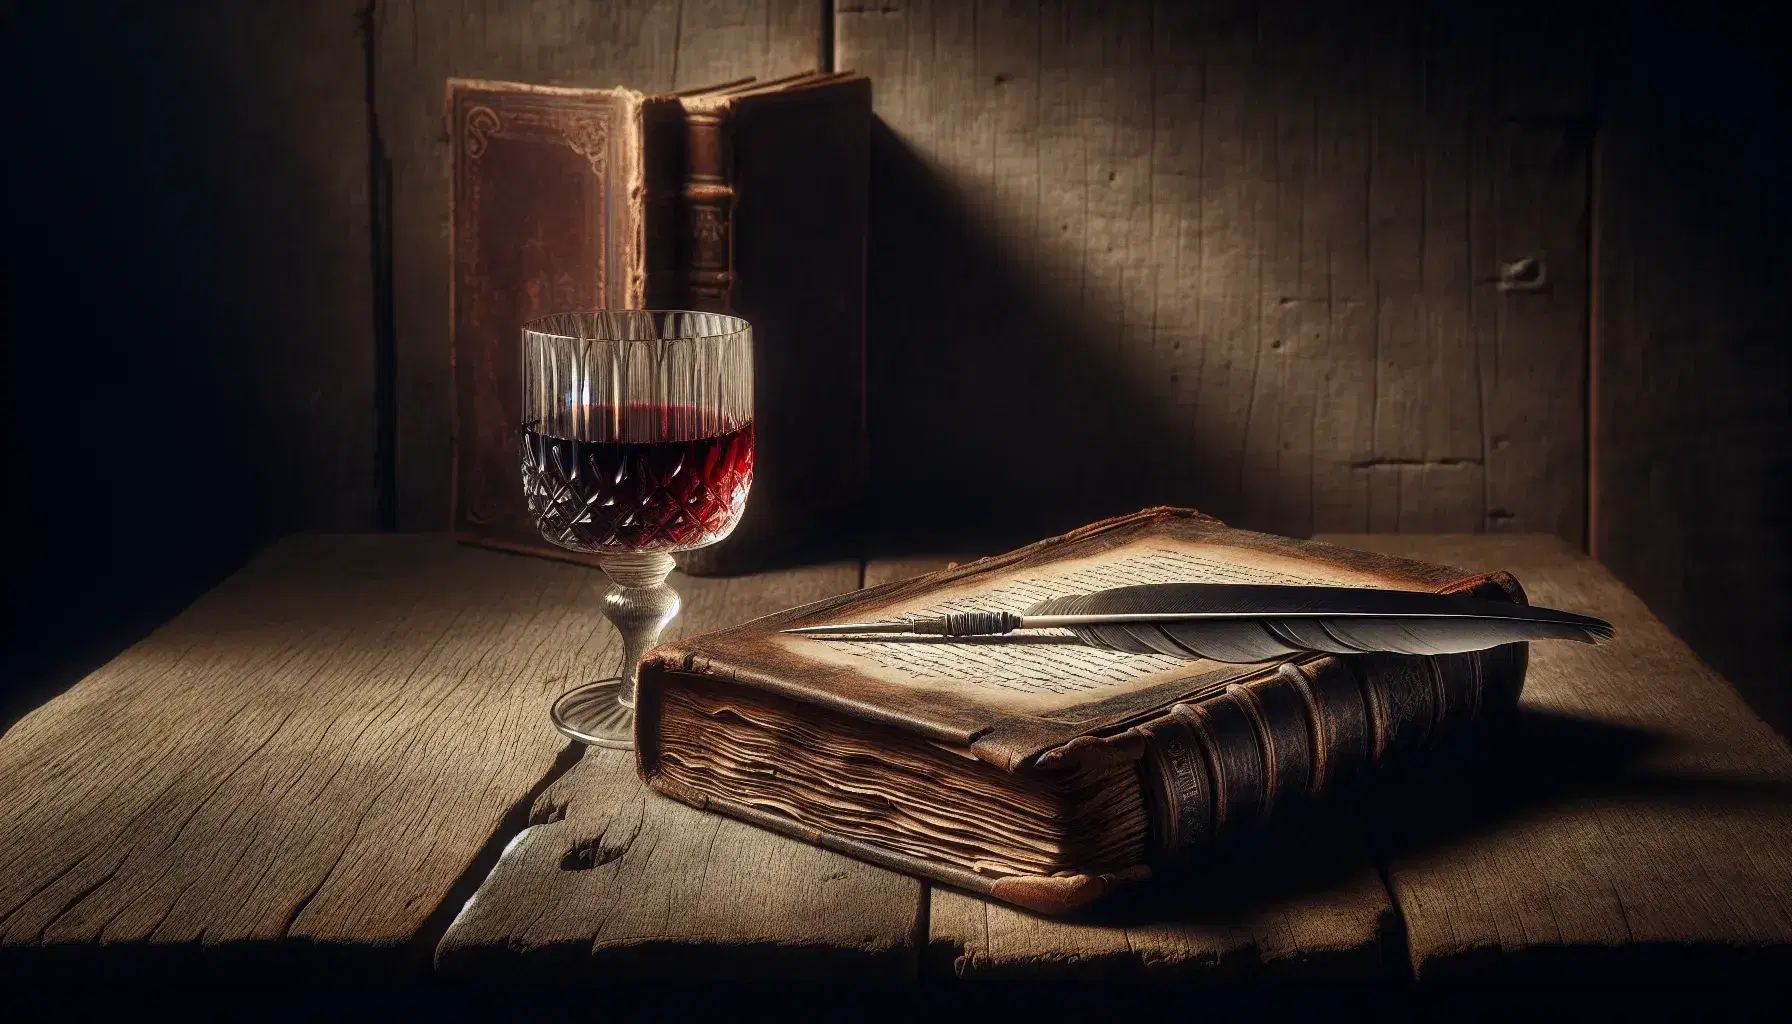 Rustic wooden table with open antique book, quill pen and goblet of red wine, blurred wooden wall background, calm atmosphere.